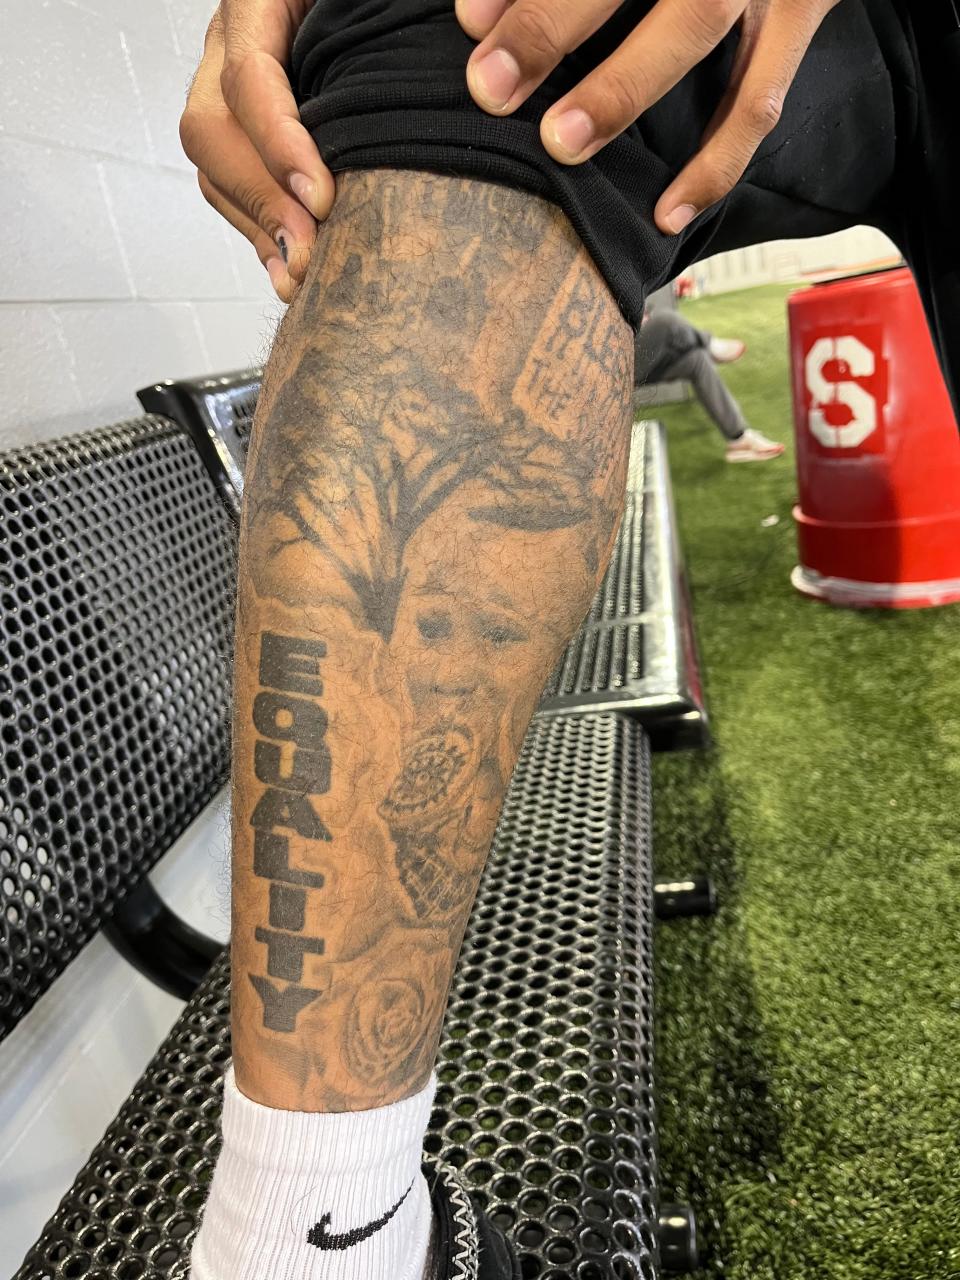 Gee Scott displays tattoo art meaningful to the Ohio State tight end.